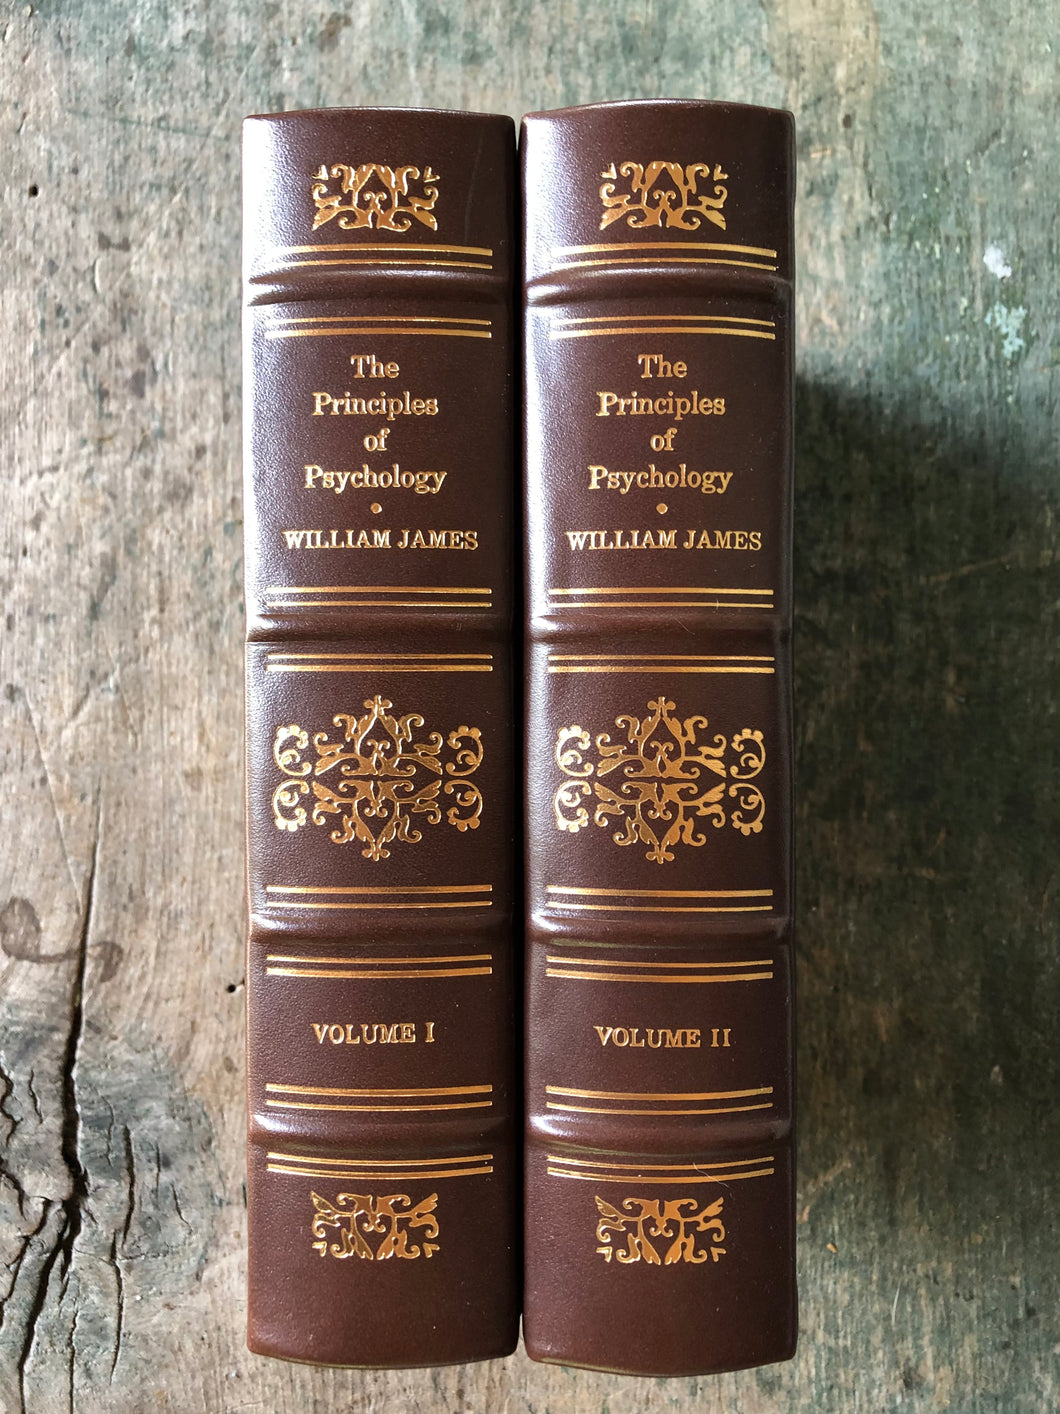 The Principles of Psychology in Two Volumes by William James